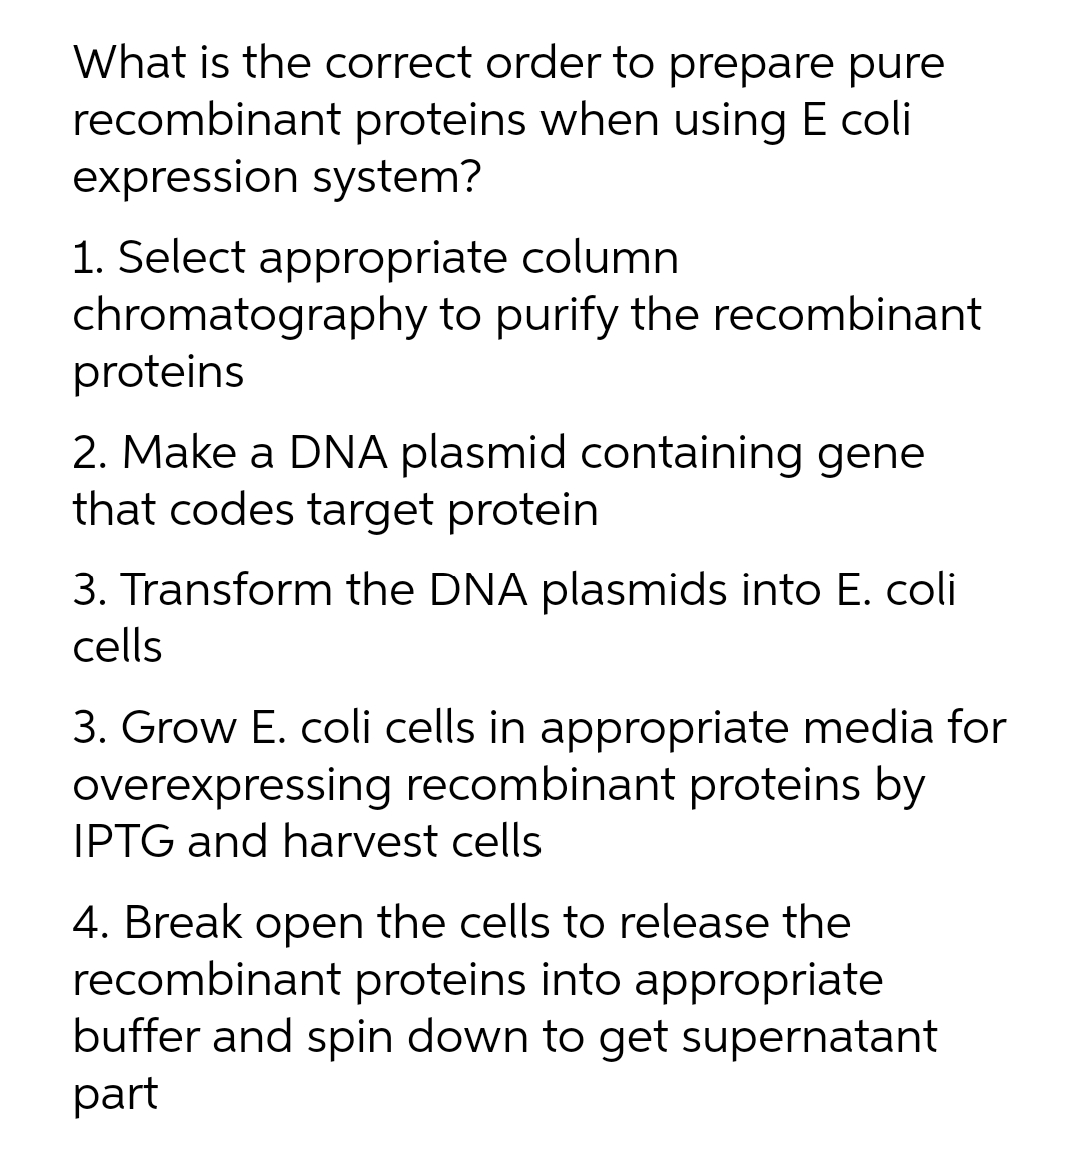 What is the correct order to prepare pure
recombinant proteins when using E coli
expression system?
1. Select appropriate column
chromatography to purify the recombinant
proteins
2. Make a DNA plasmid containing gene
that codes target protein
3. Transform the DNA plasmids into E. coli
cells
3. Grow E. coli cells in appropriate media for
overexpressing recombinant proteins by
IPTG and harvest cells
4. Break open the cells to release the
recombinant proteins into appropriate
buffer and spin down to get supernatant
part
